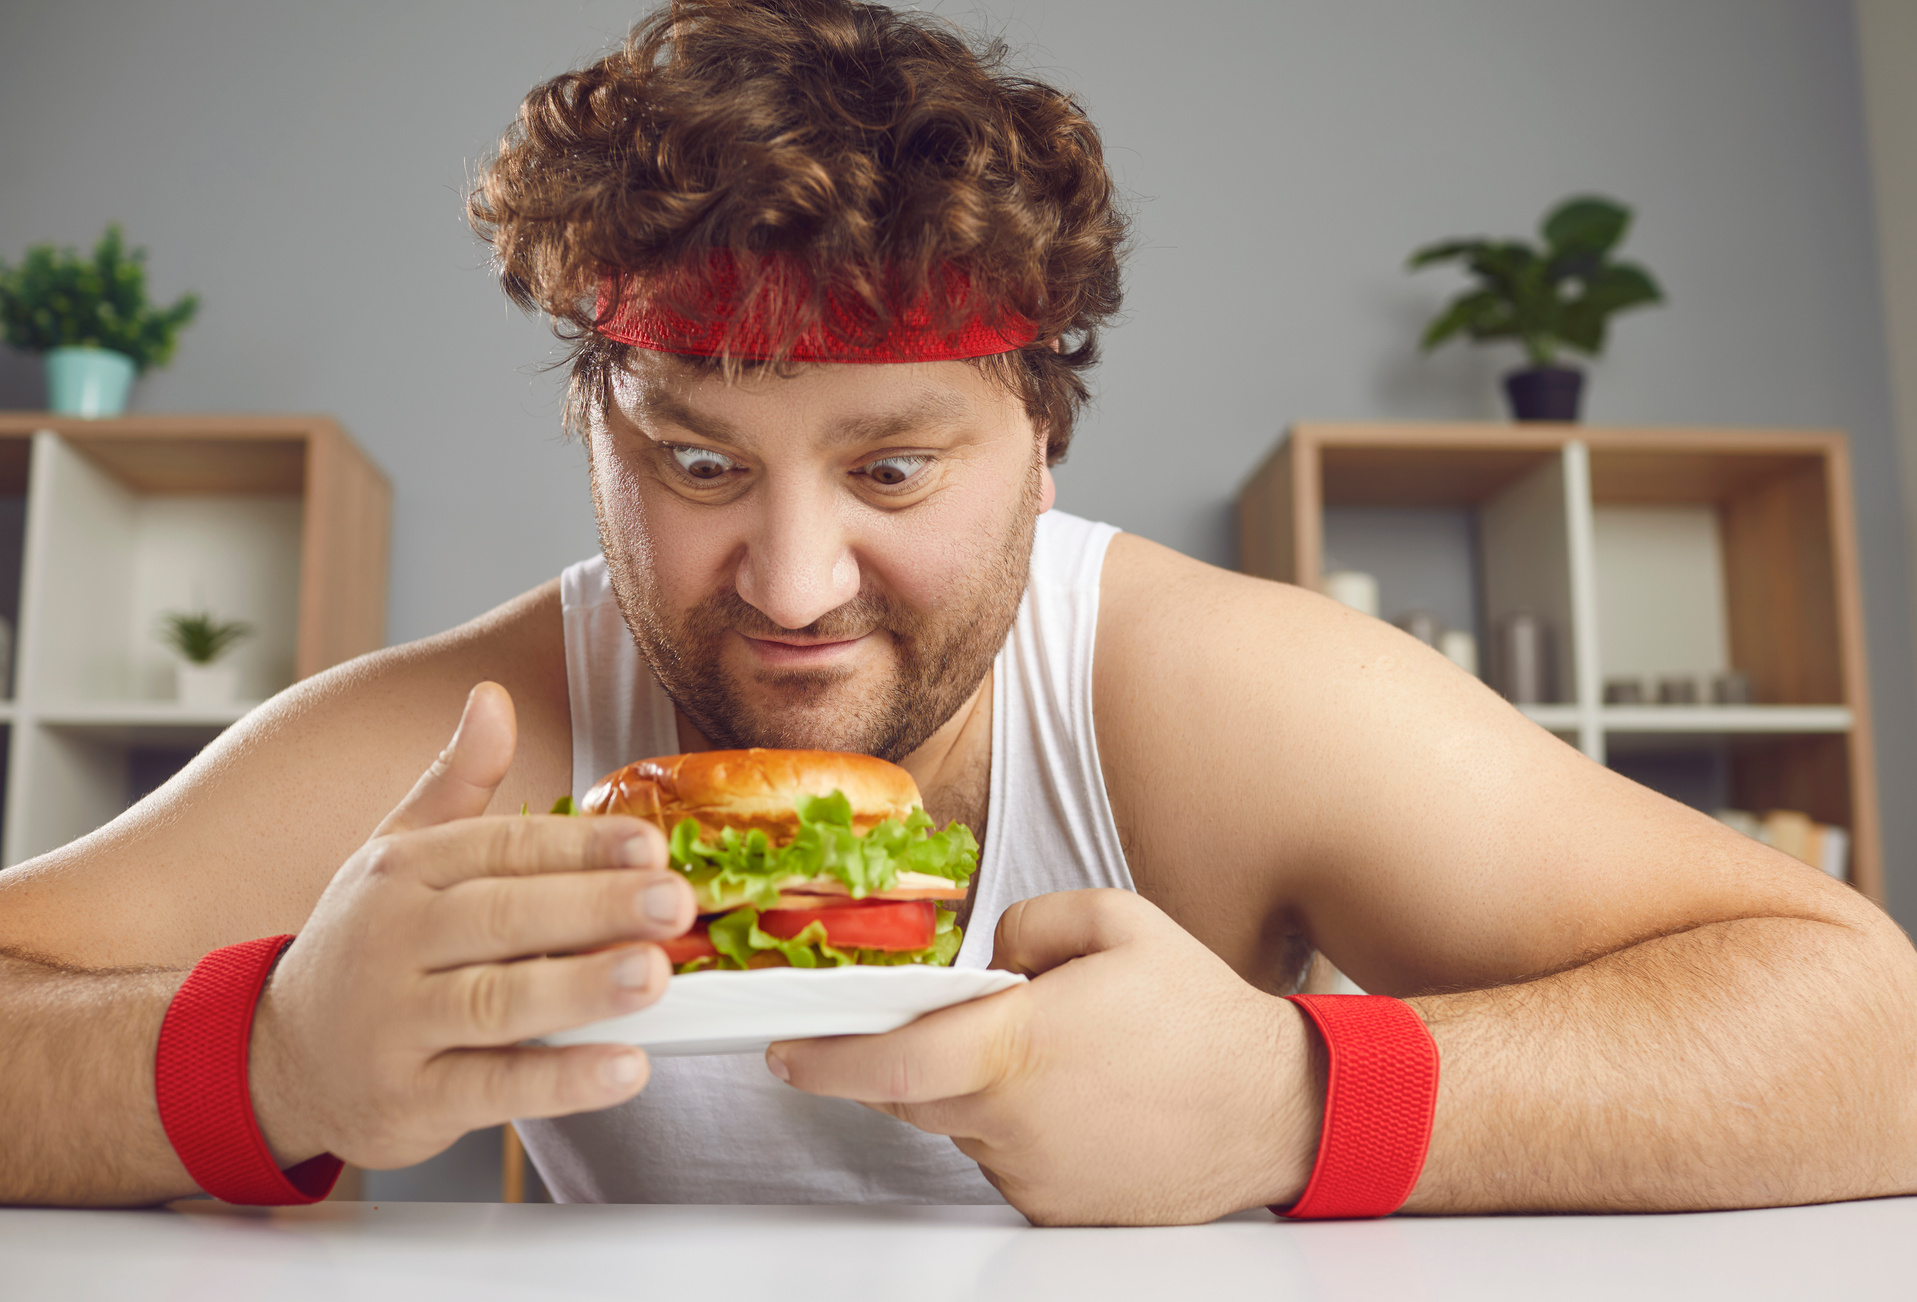 Funny Chubby Guy in Sportswear Is Being Tempted by Unhealthy but Delicious Burger